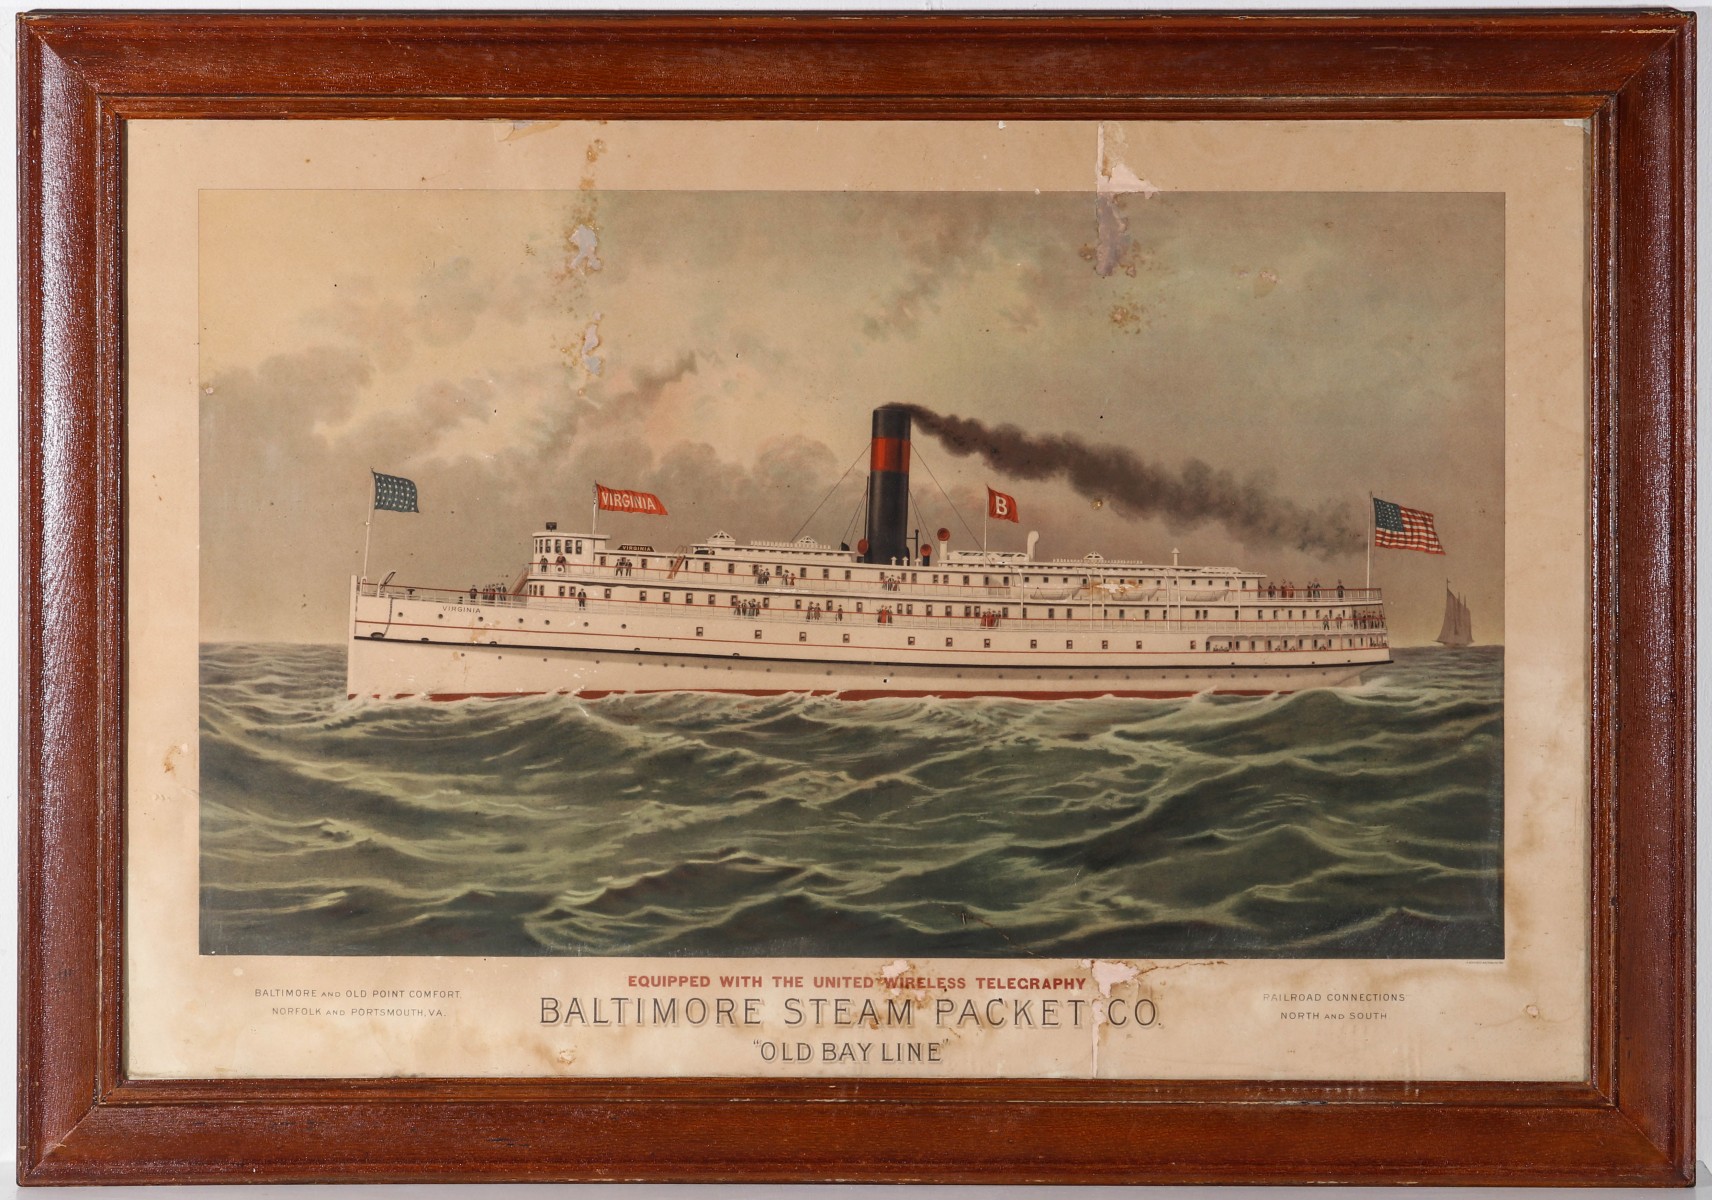 A BALTIMORE STEAM PACKET CO. ADVERTISING PRINT C. 1910